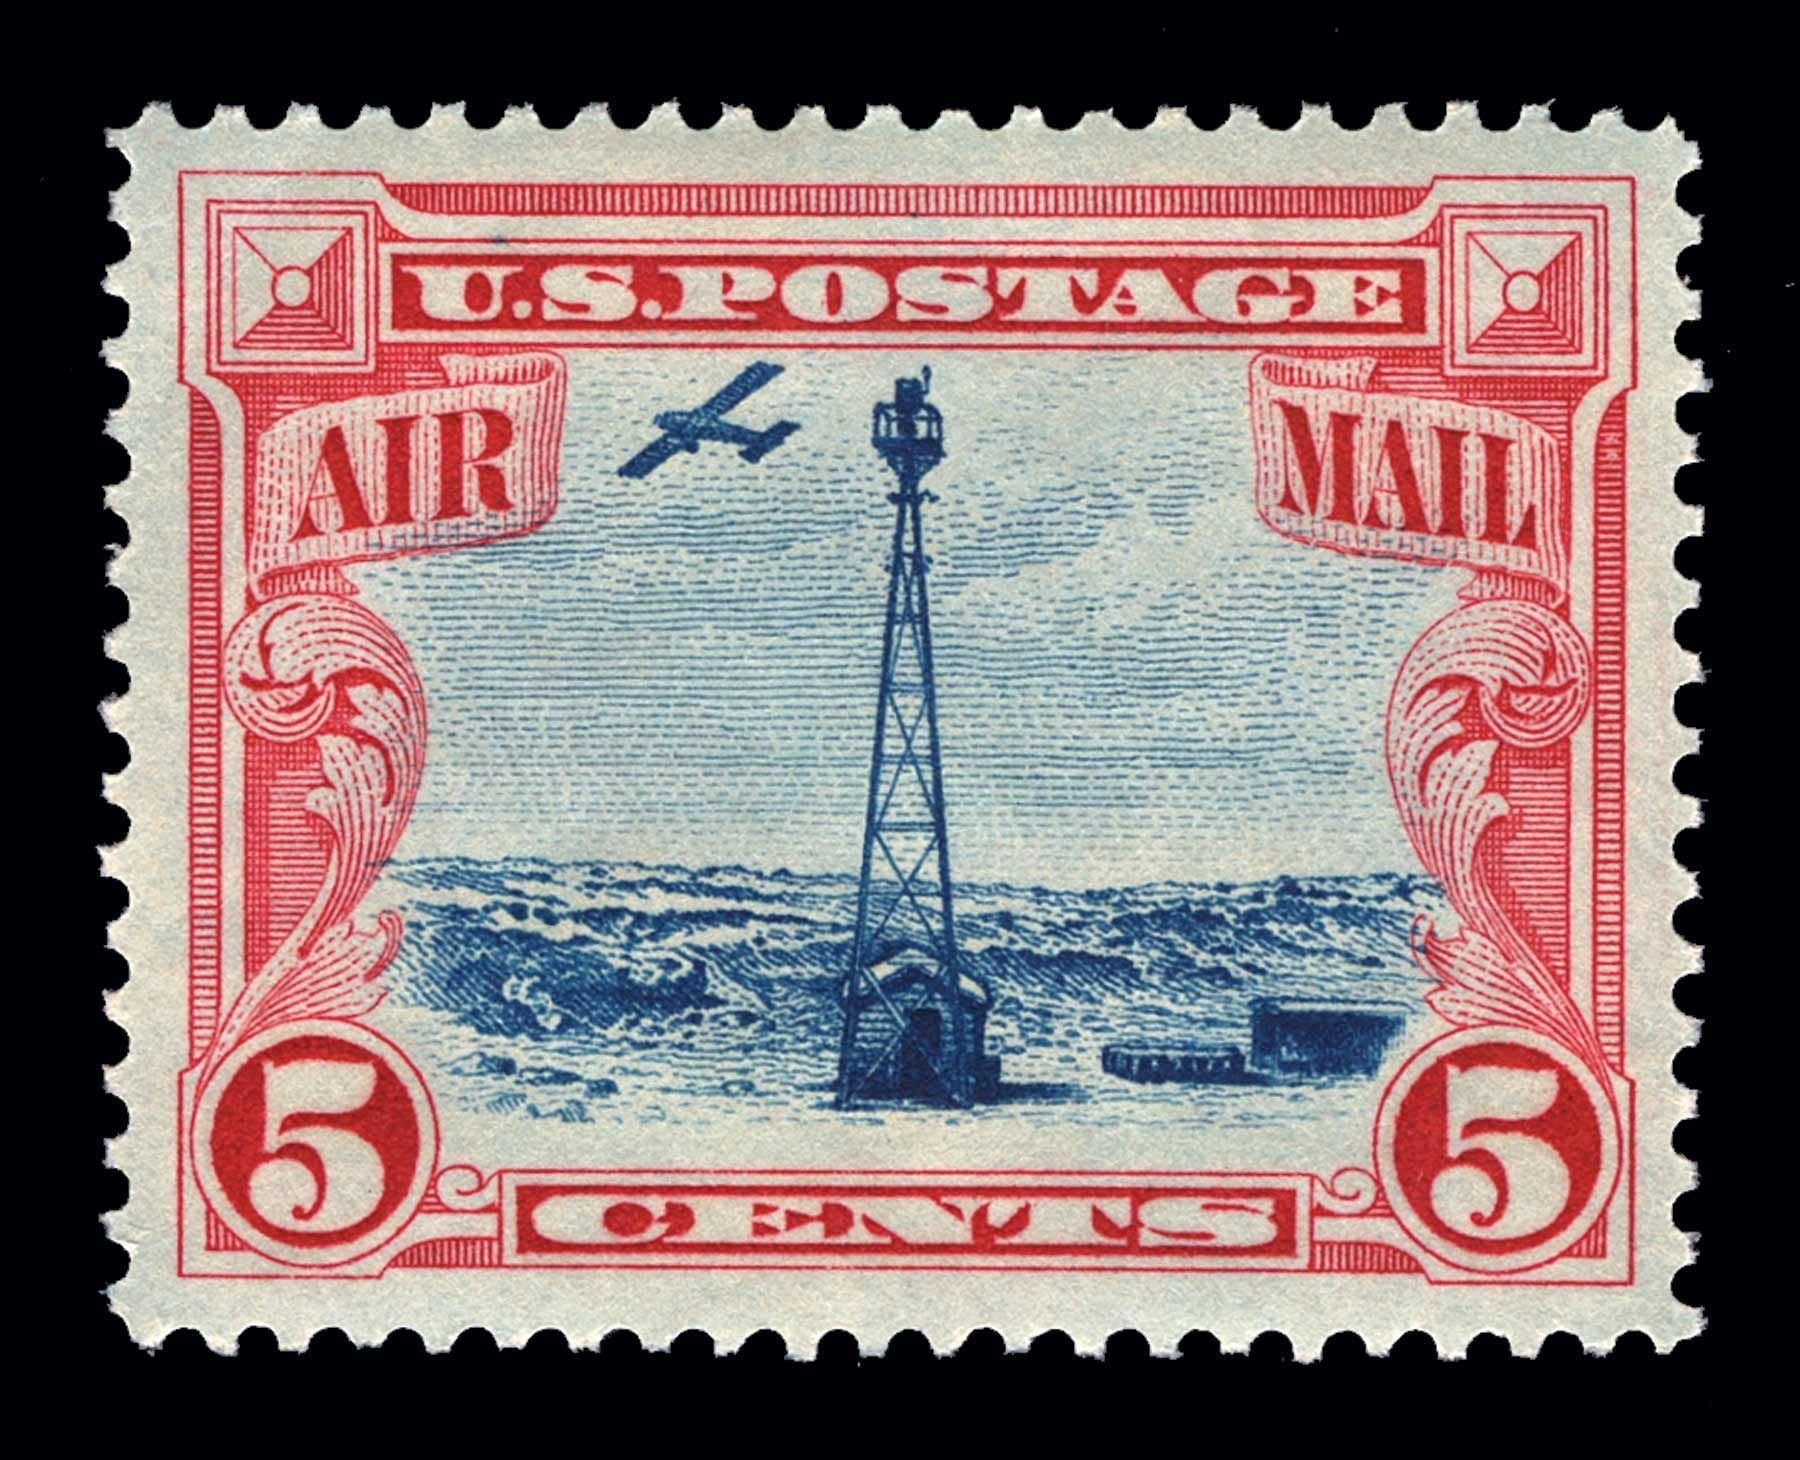 Here’s one on a stamp.